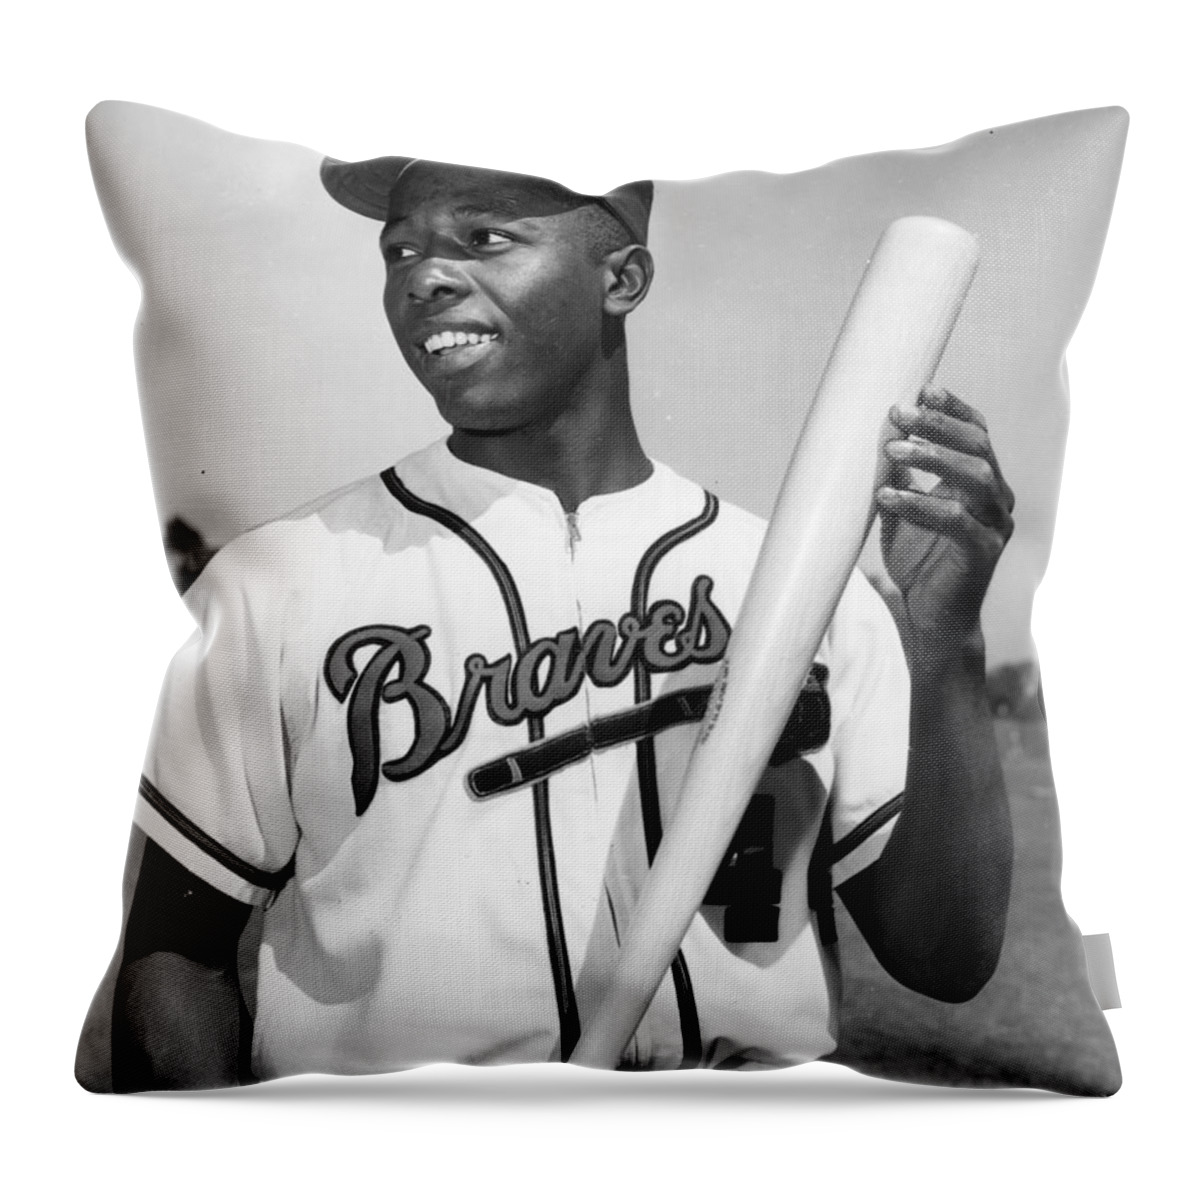 Hank Throw Pillow featuring the photograph Hank Aaron Poster by Gianfranco Weiss